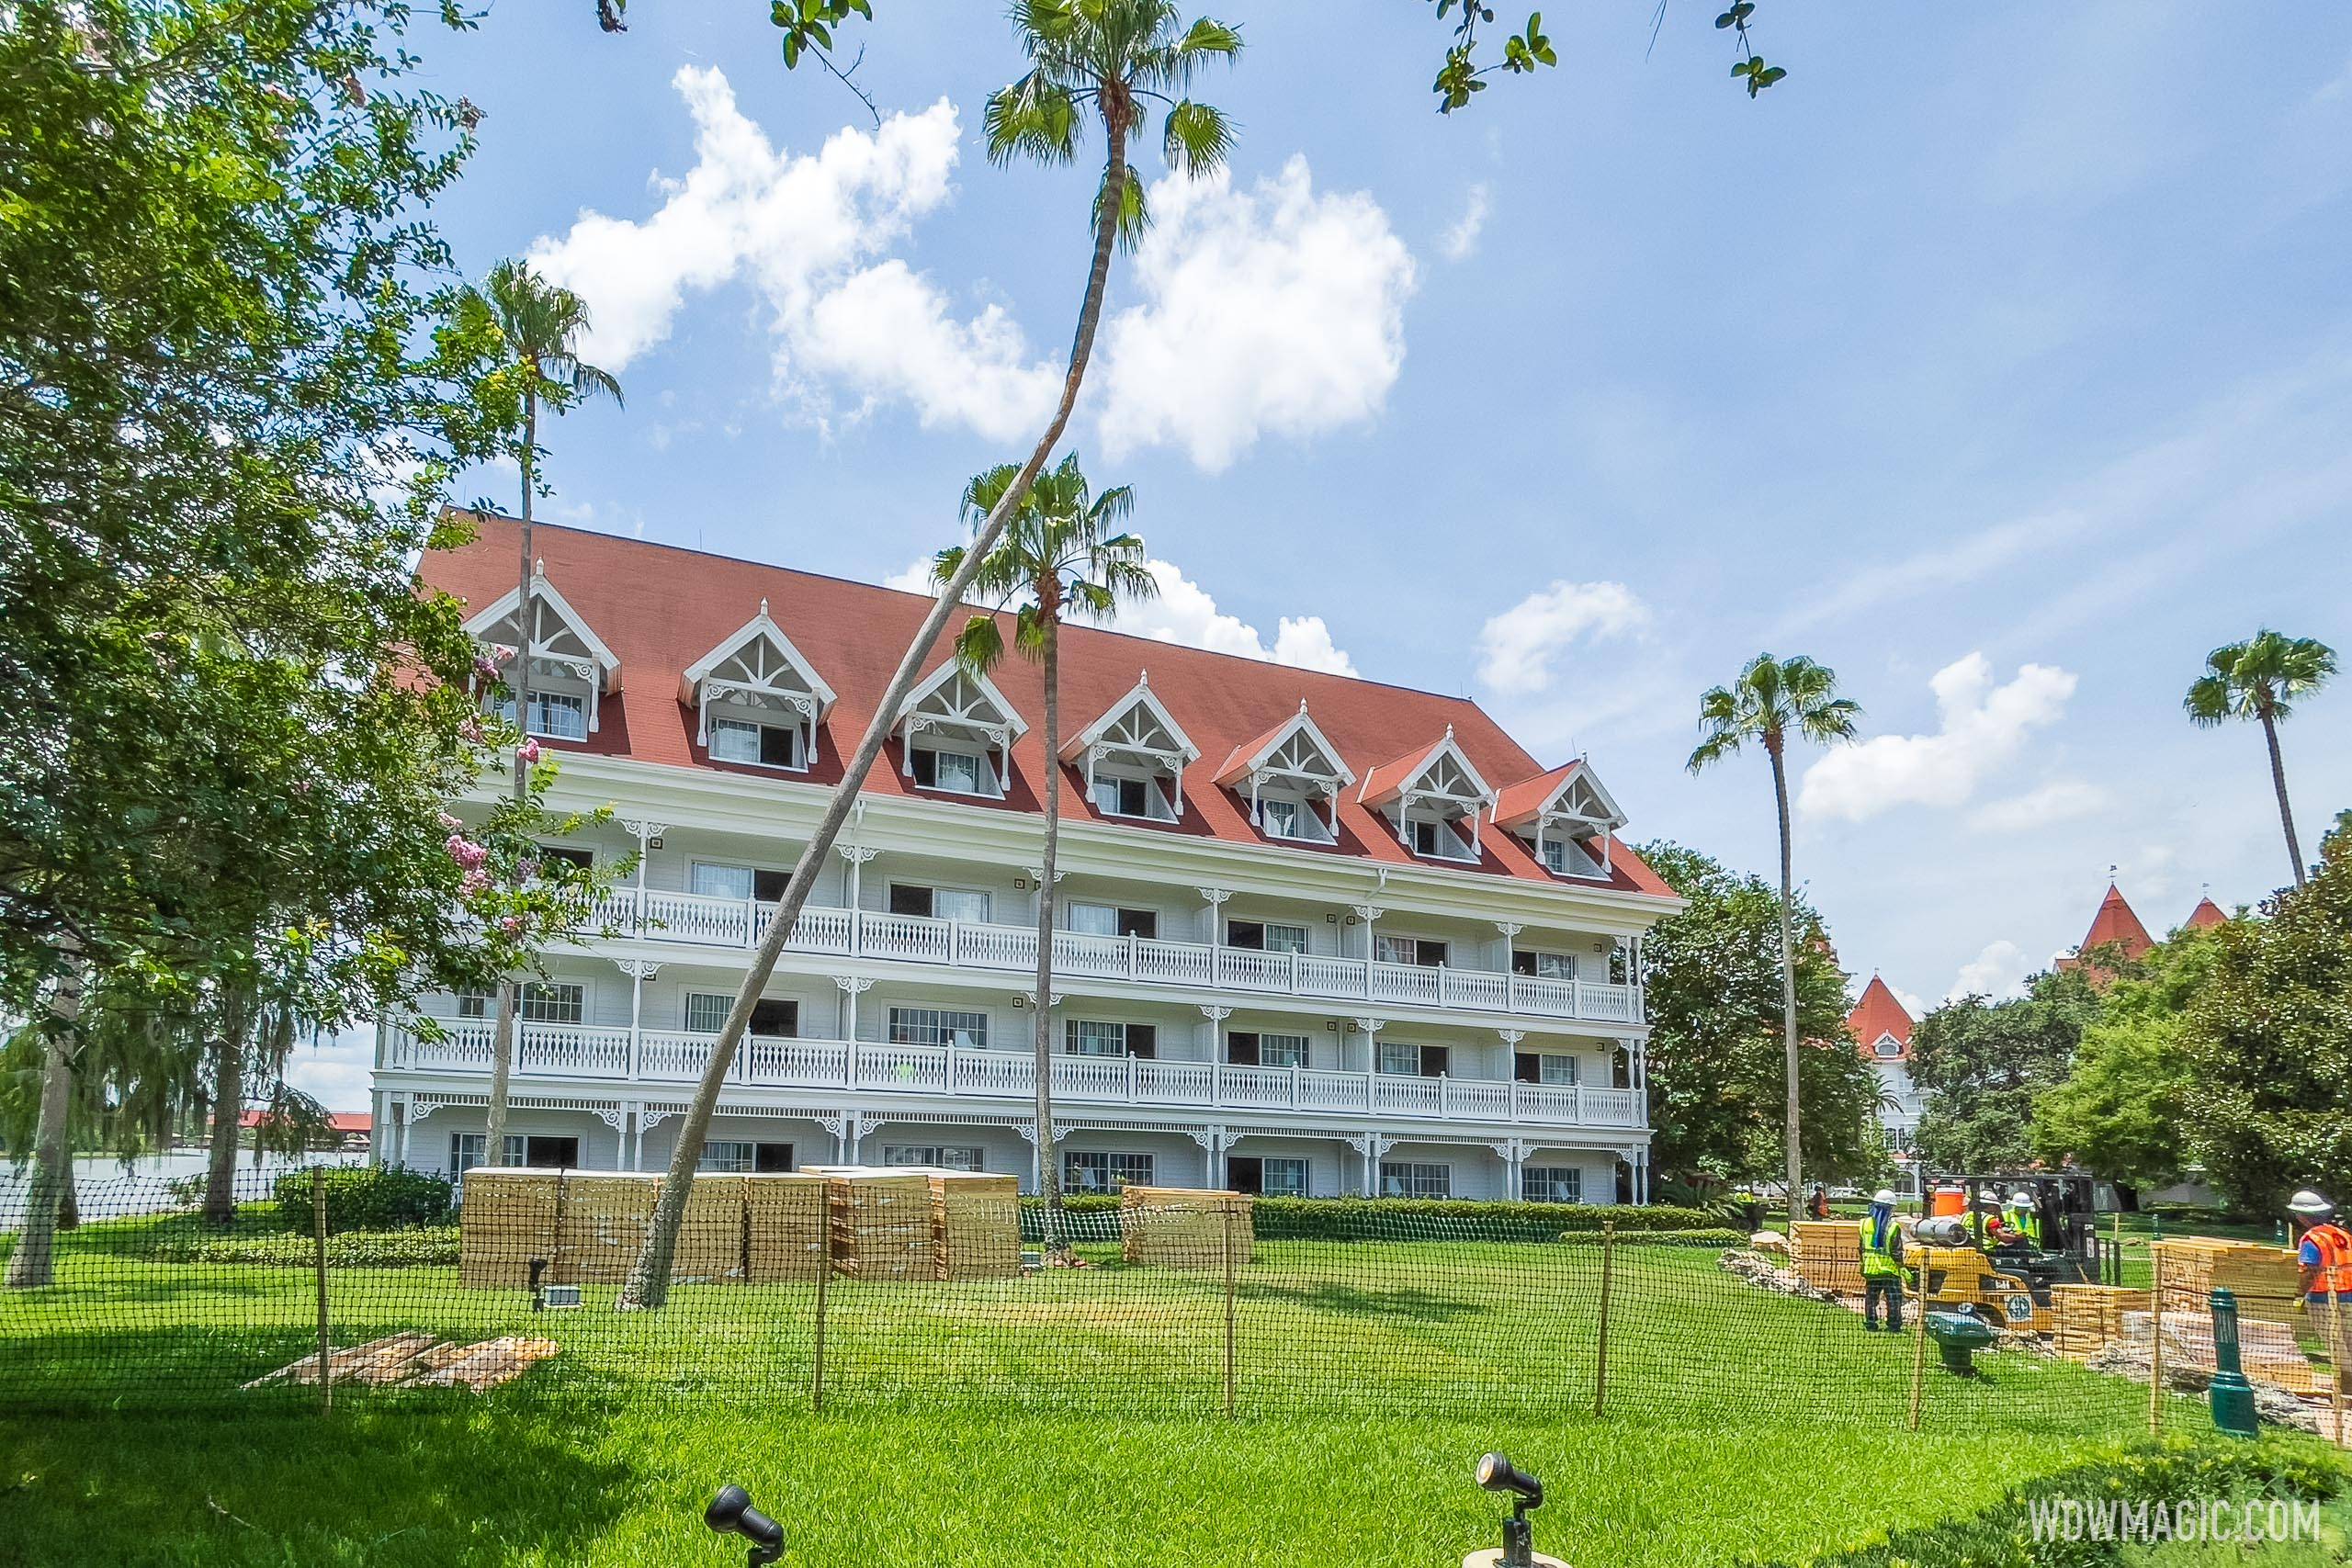 Renovation work moves to Boca Chica building at Disney's Grand Floridian Resort